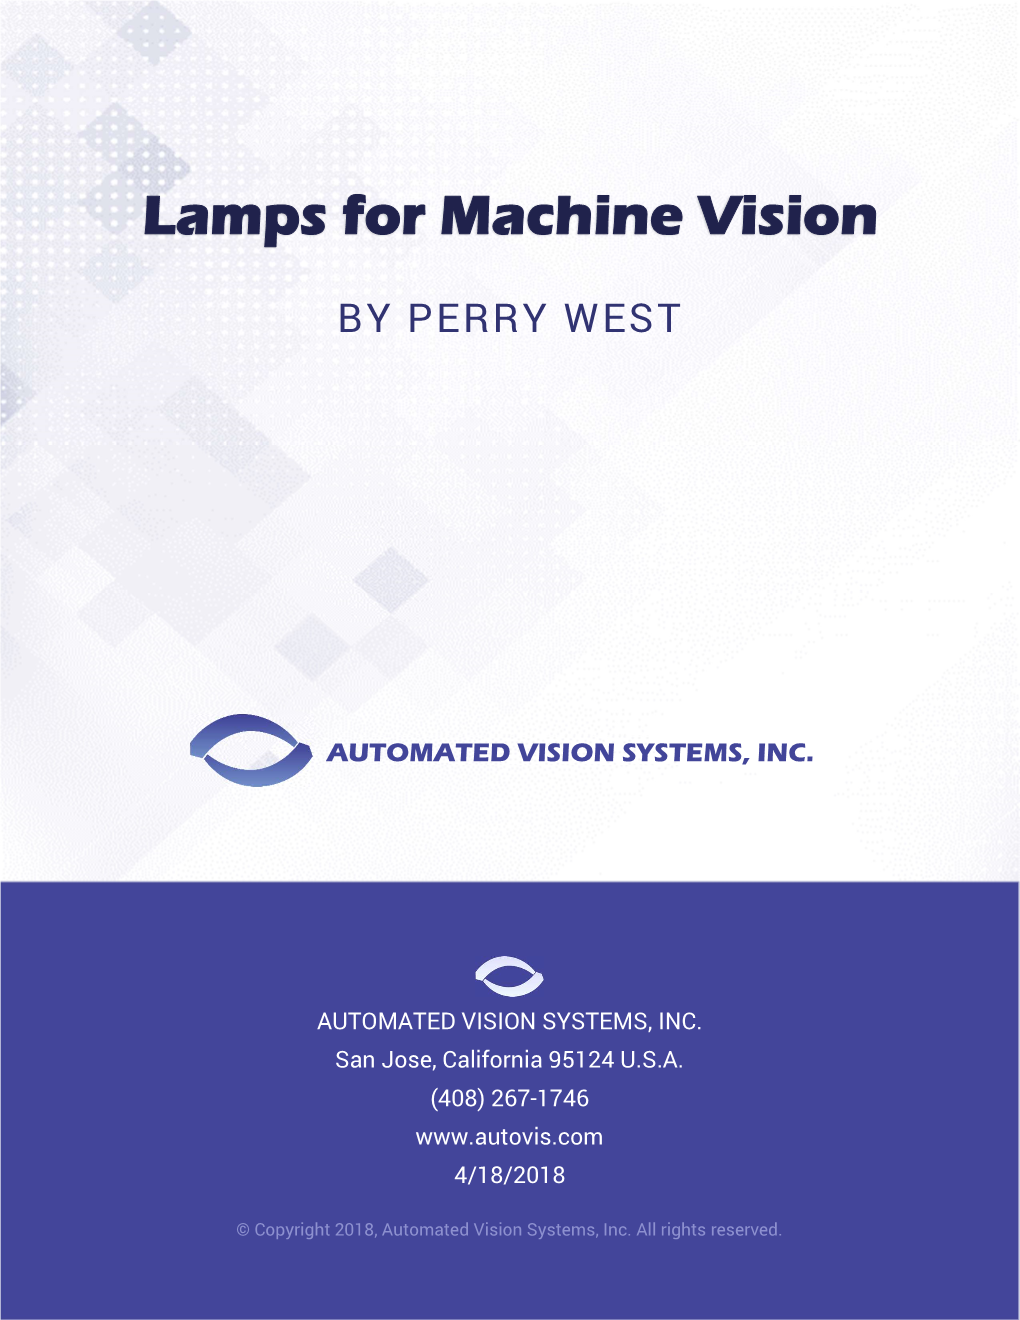 Lamps for Machine Vision